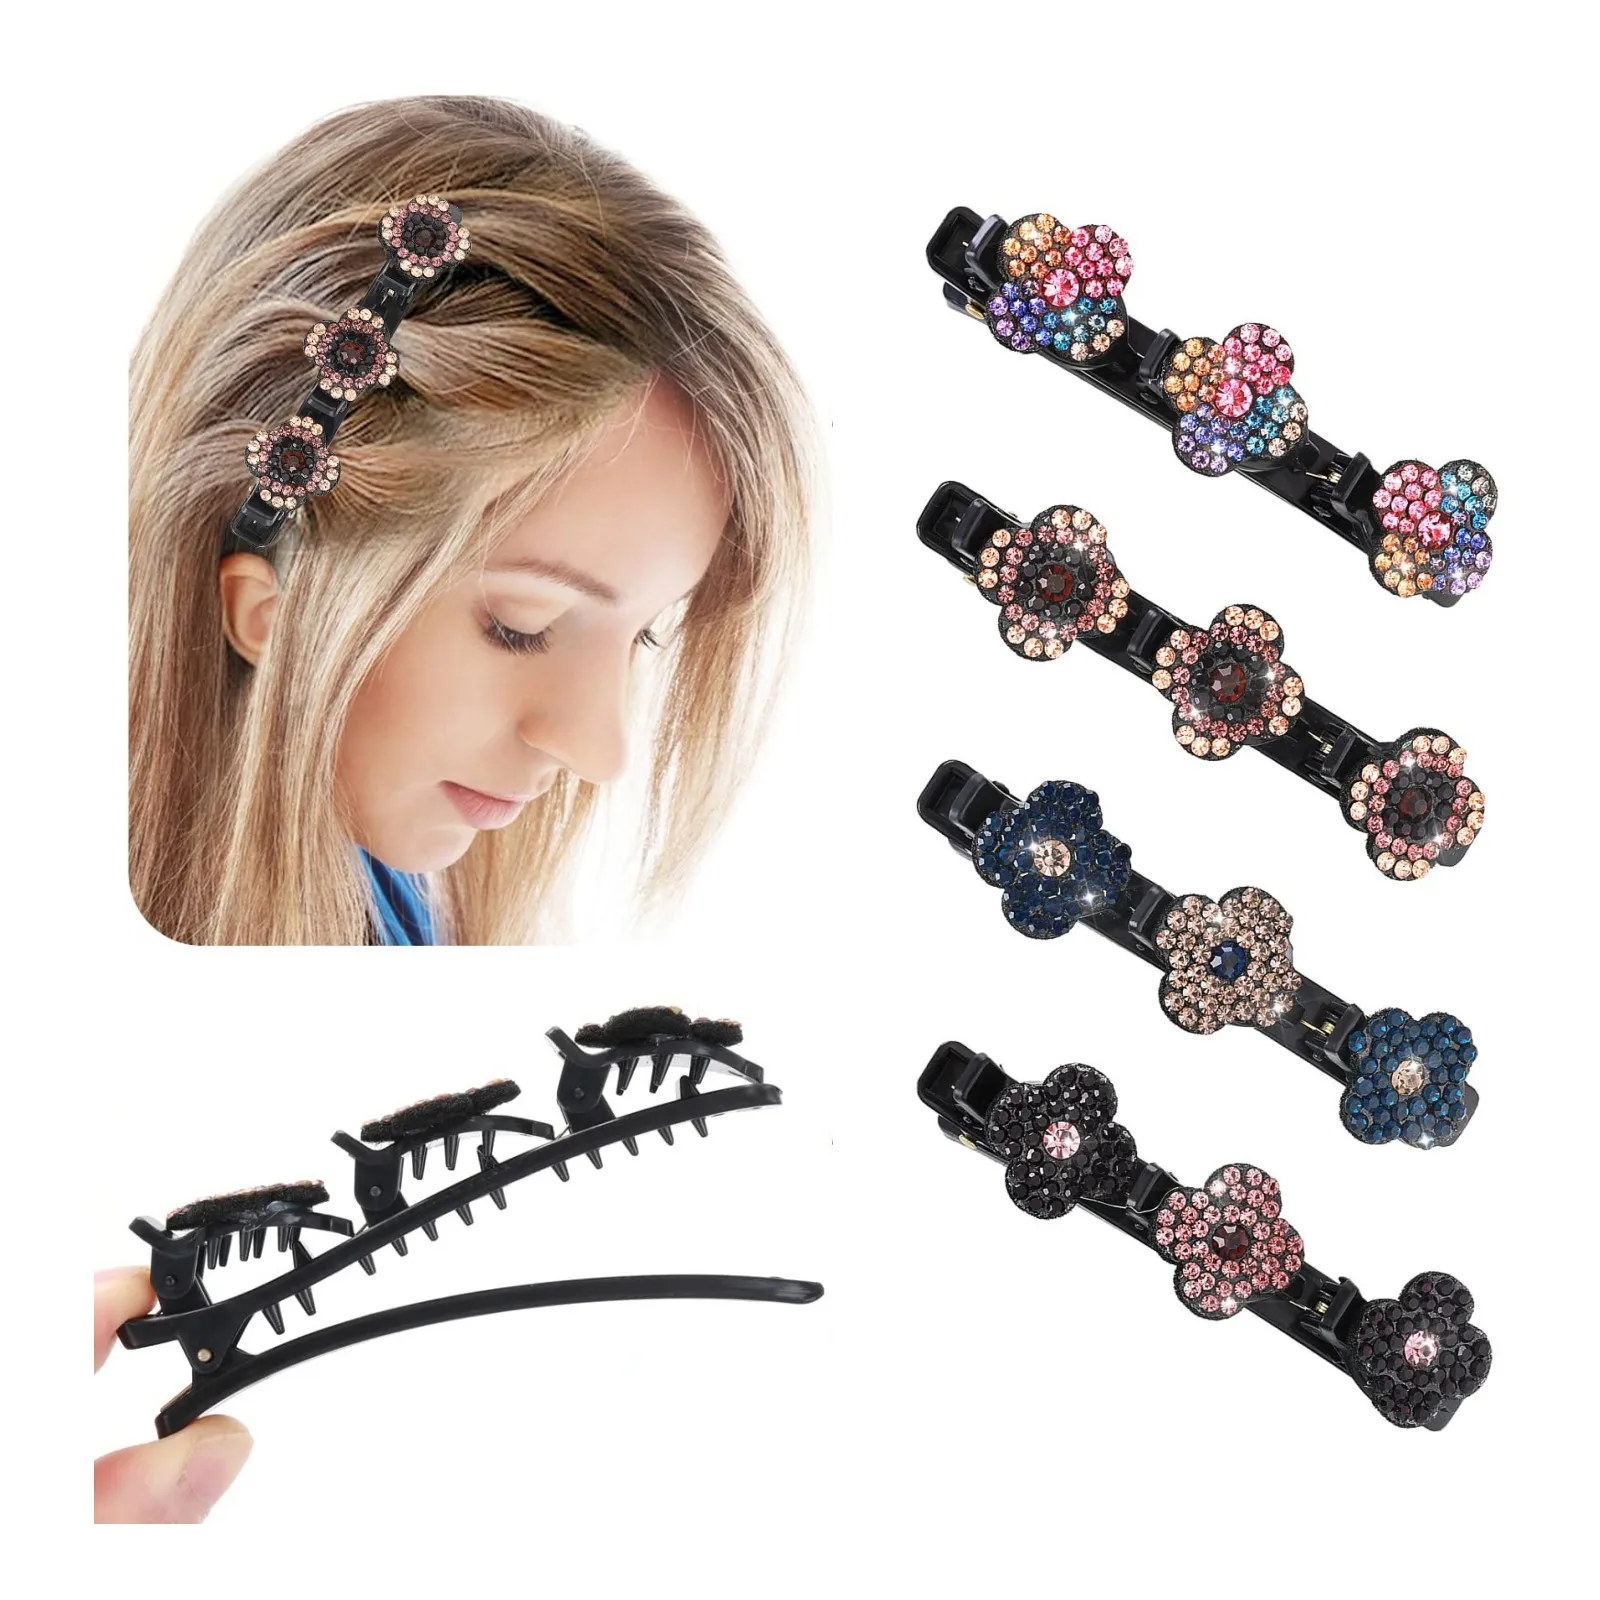 

Braided Hair Clips with 3 Small Clips Sparkling Crystal Stone Hairclip with Rhinestones for Women Girls Hair Styling Tools